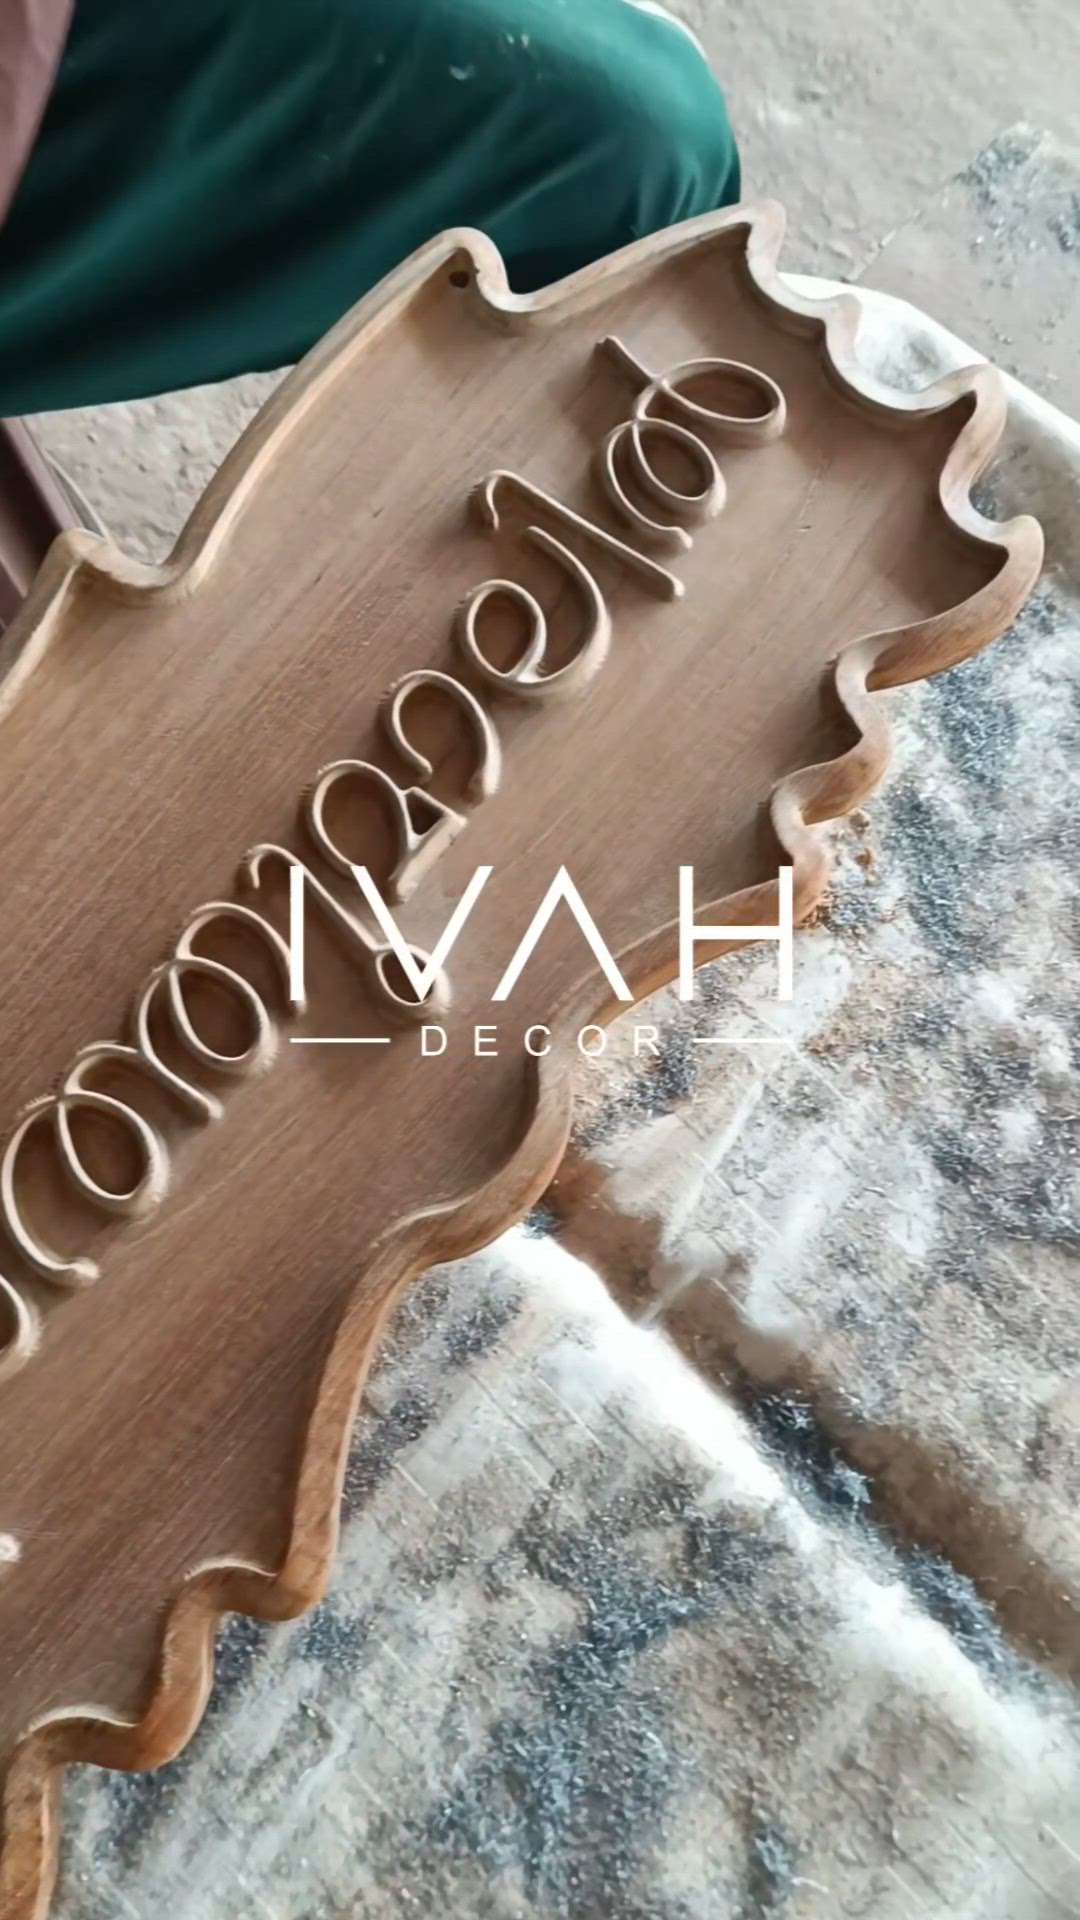 wooden House Name Plate 
For more Details : 7561091369
#ivah #ivahdecor #woodcarving #woodcarvingart